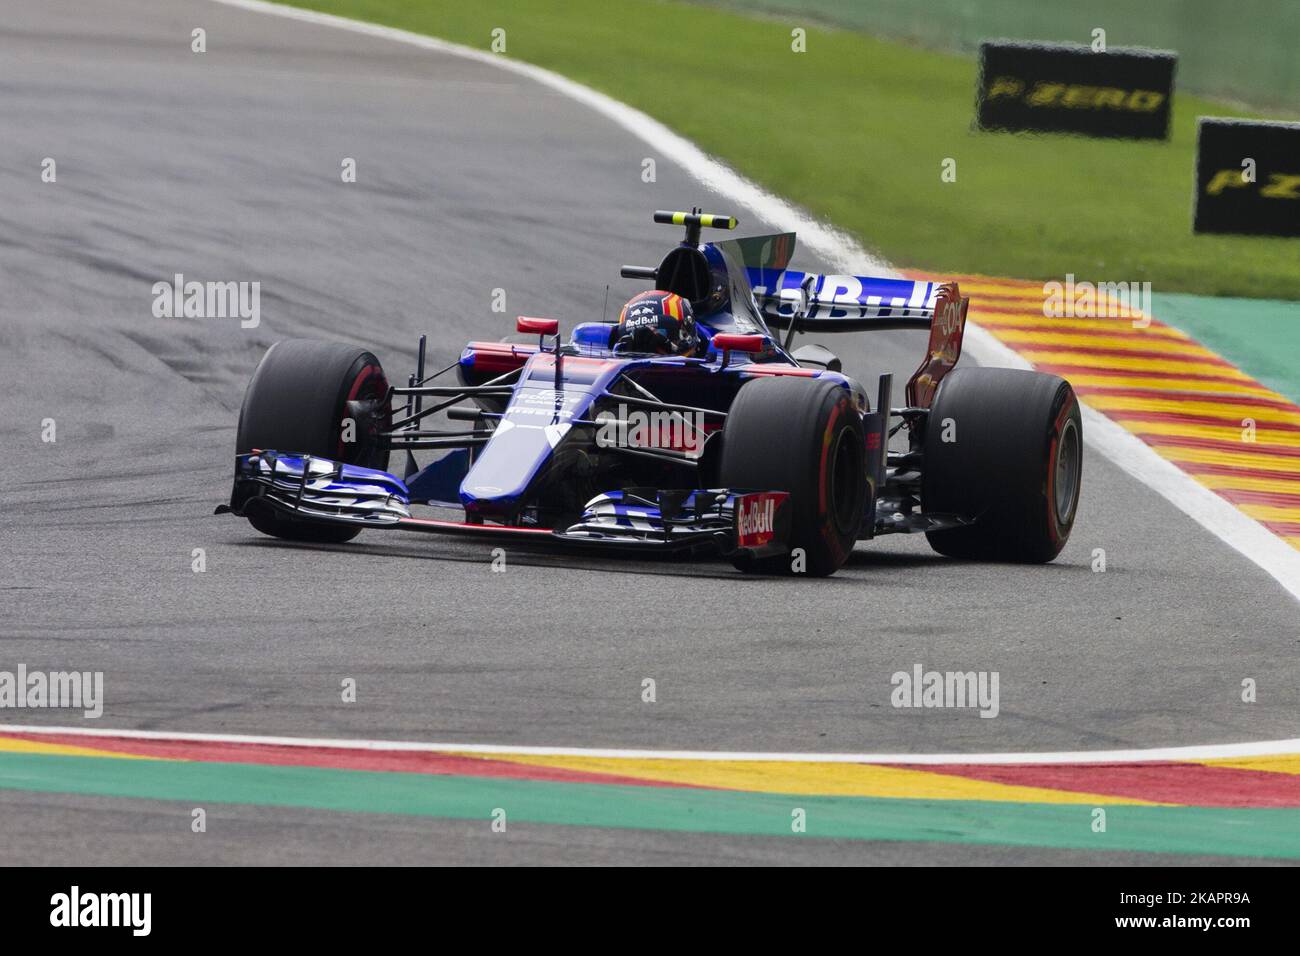 55 SAINZ Carlos from Spain of team Toro Rosso during the Formula One Belgian Grand Prix at Circuit de Spa-Francorchamps on August 26, 2017 in Spa, Belgium. (Photo by Xavier Bonilla/NurPhoto) Stock Photo